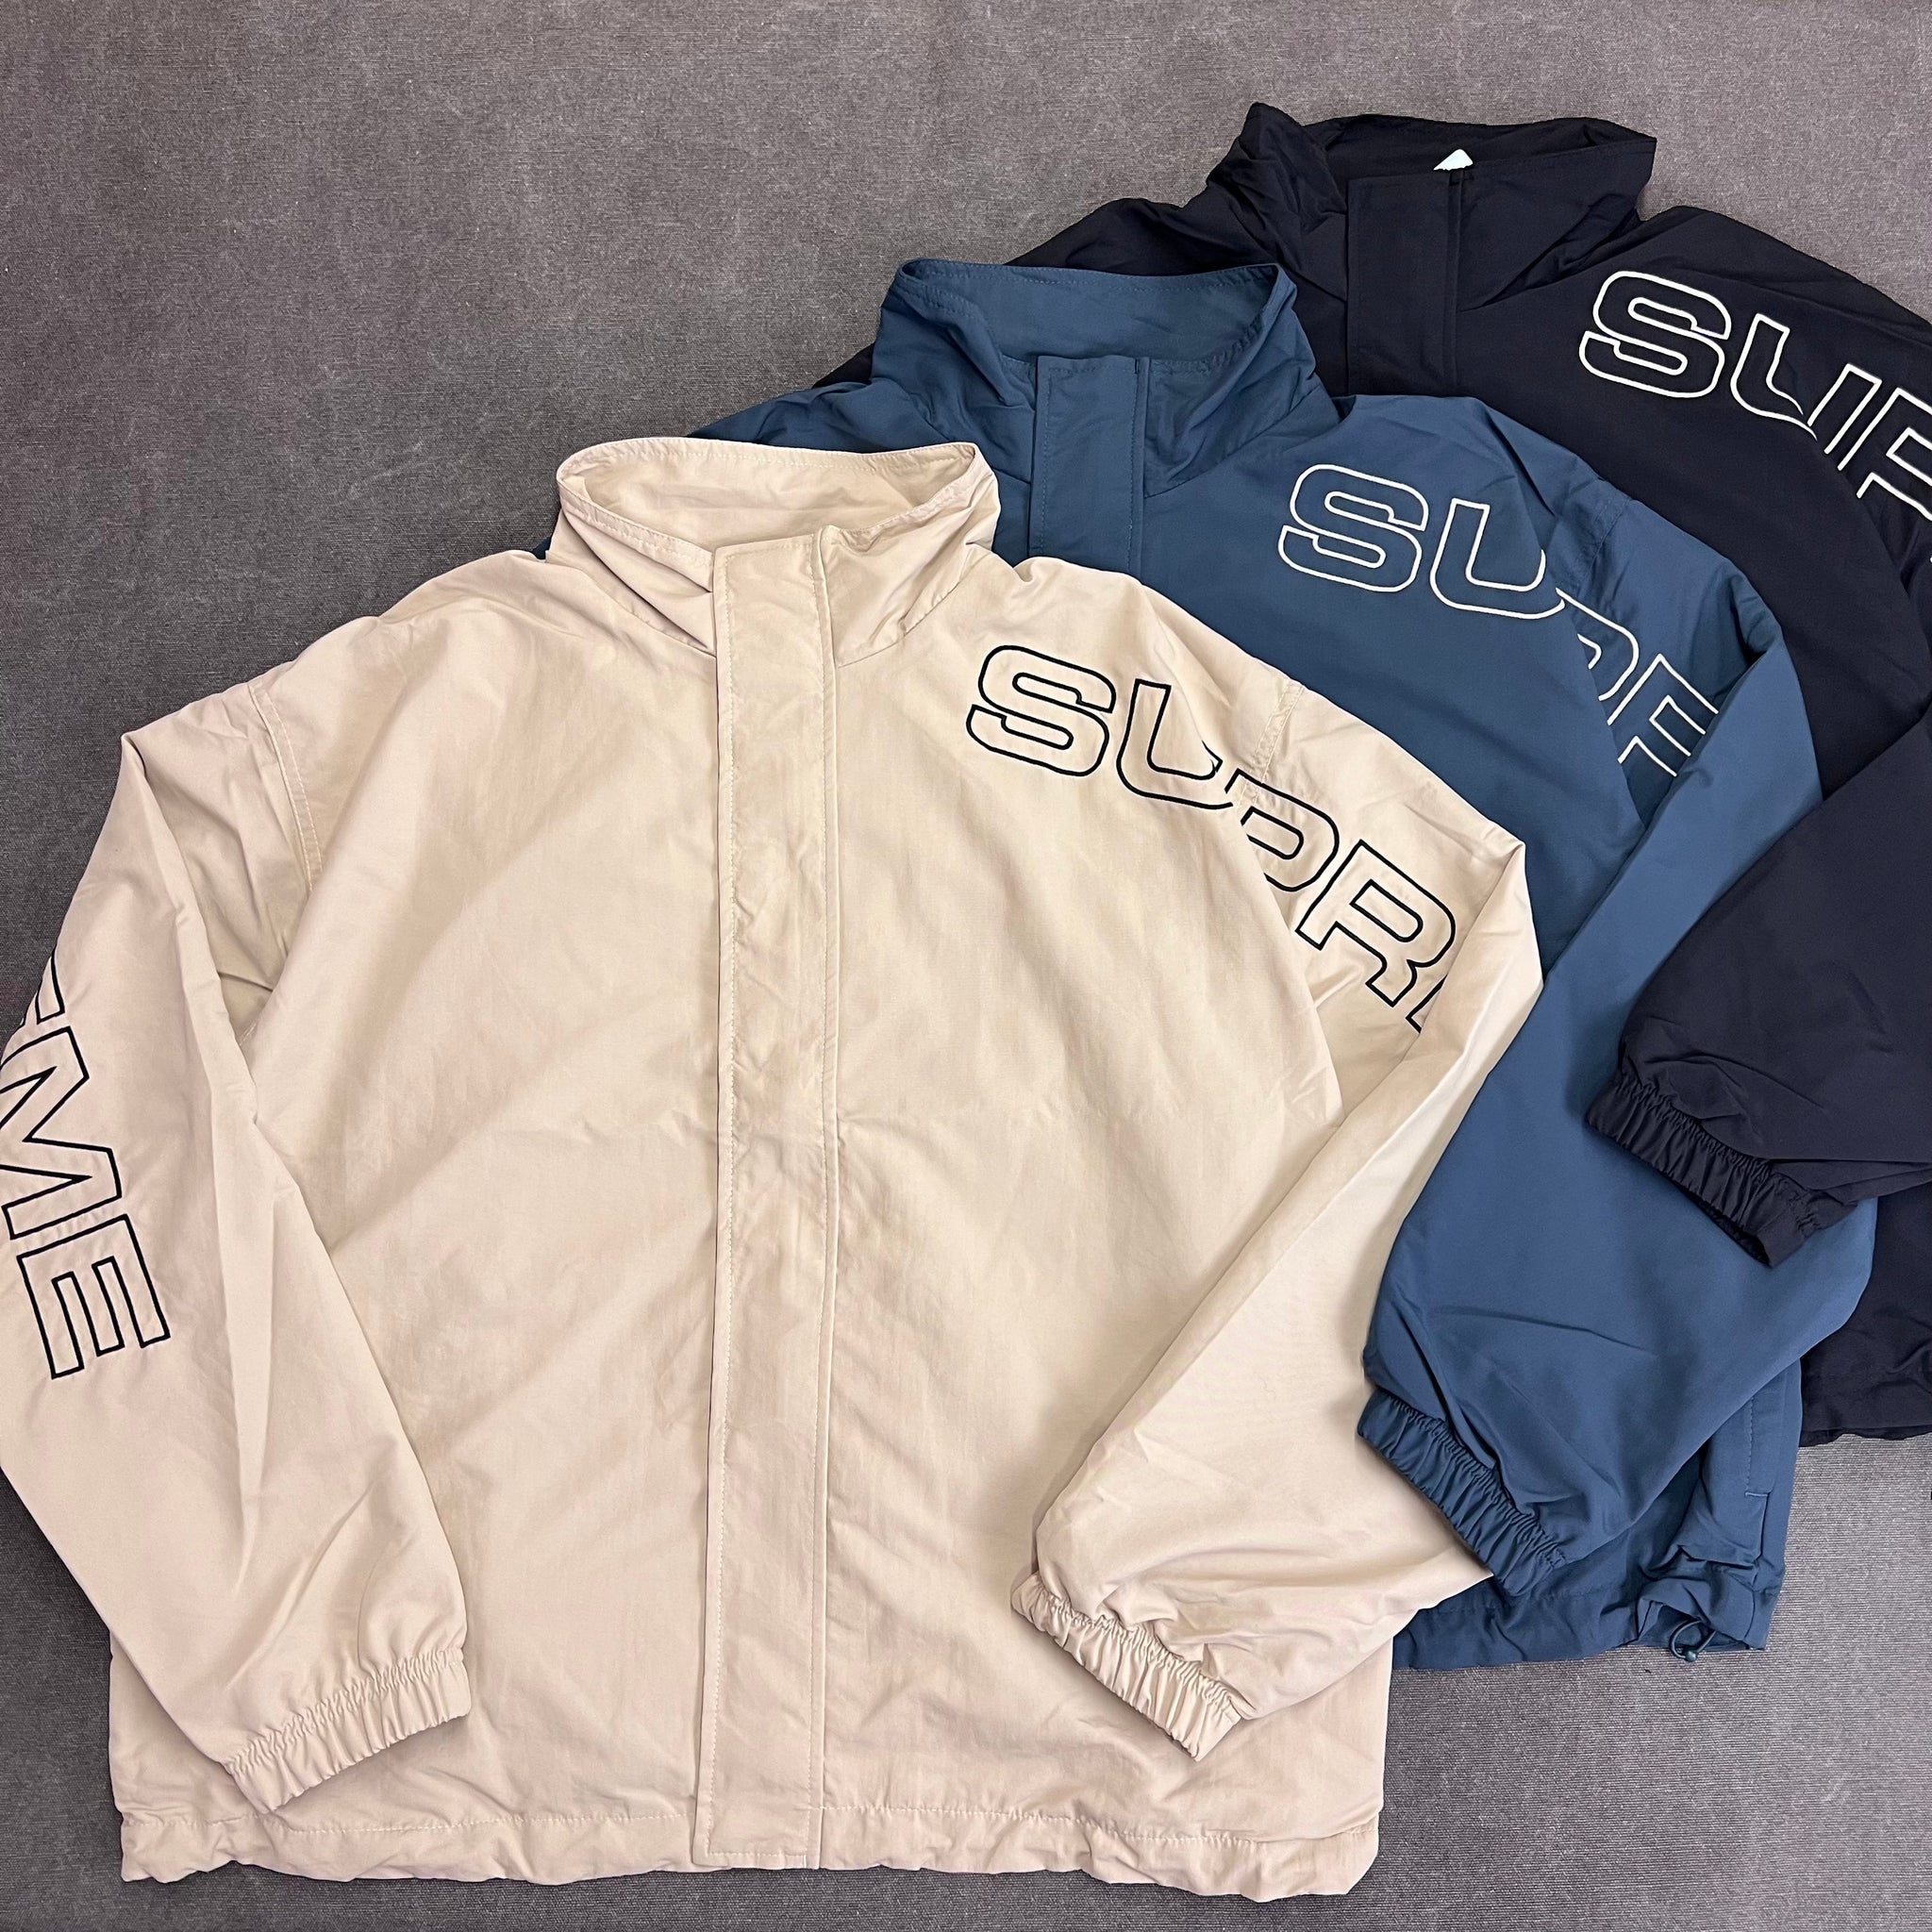 supreme Spellout Track Jacket &Pant セット - ジャケット/アウター